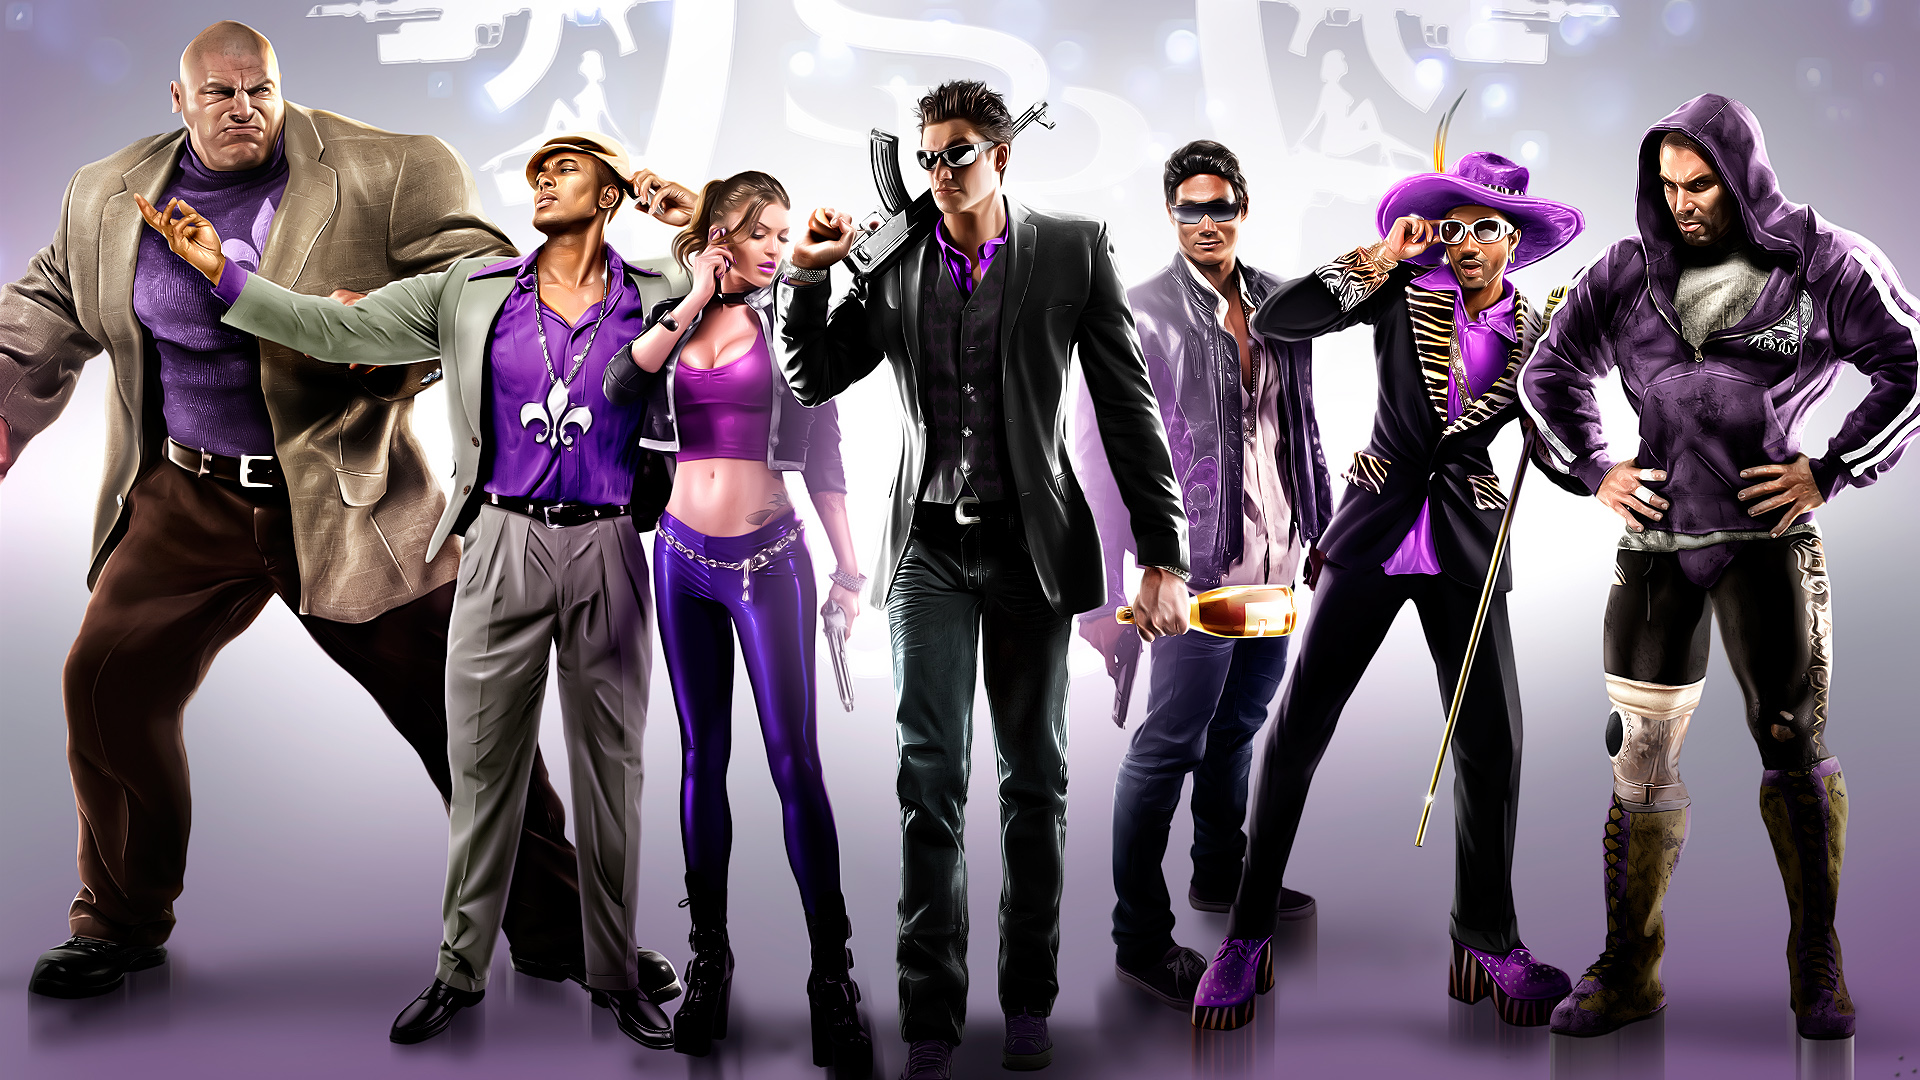 Saints Row: The Third: The Full Package